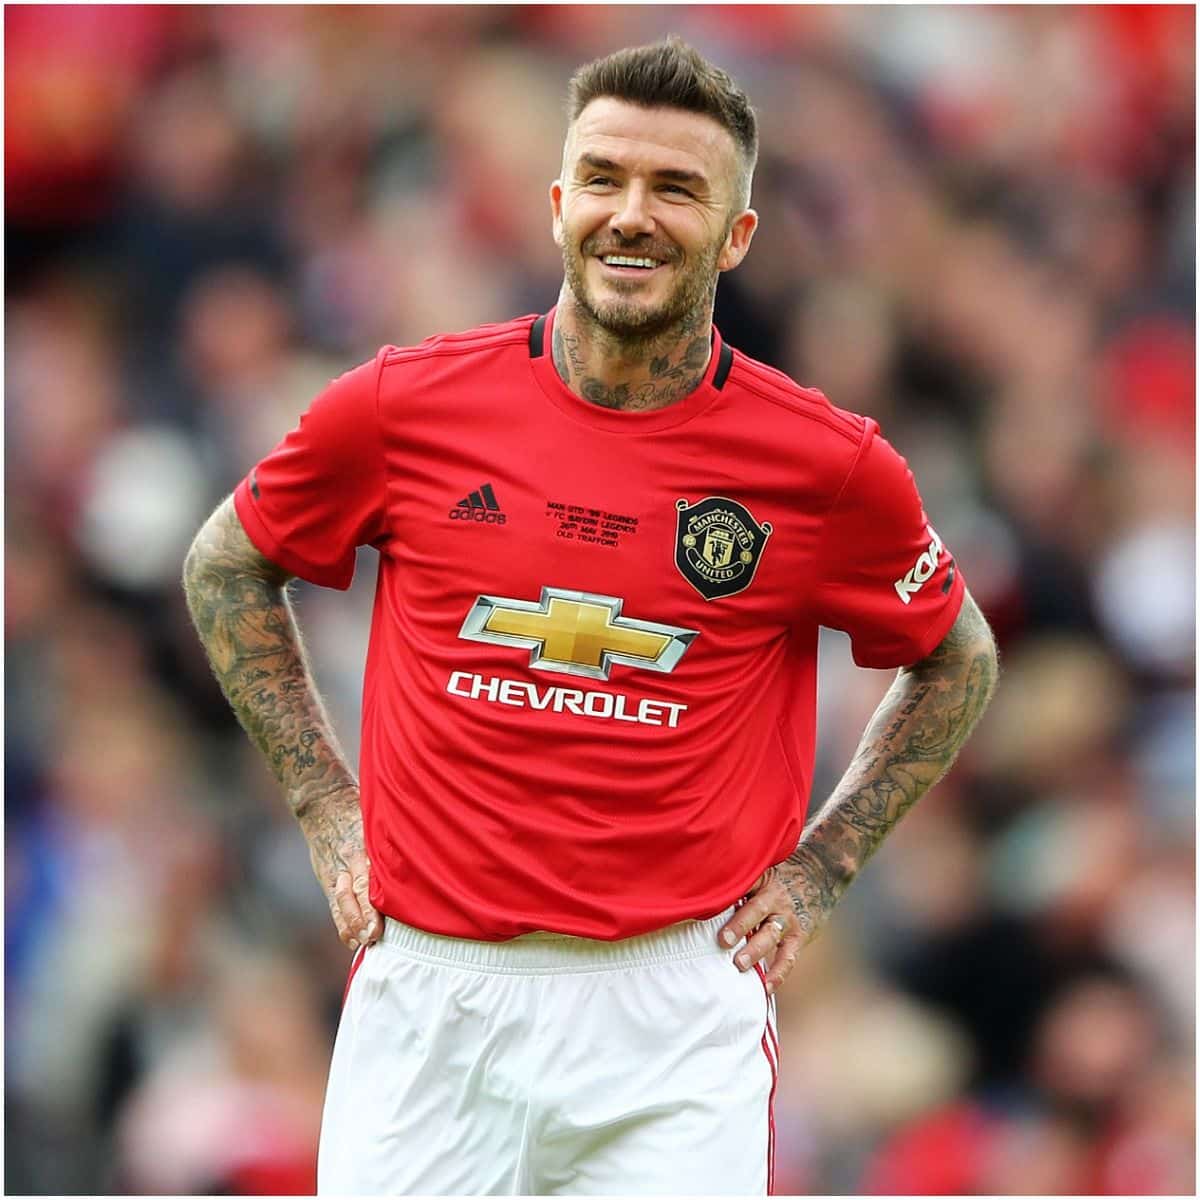 what is the net worth of David Beckham